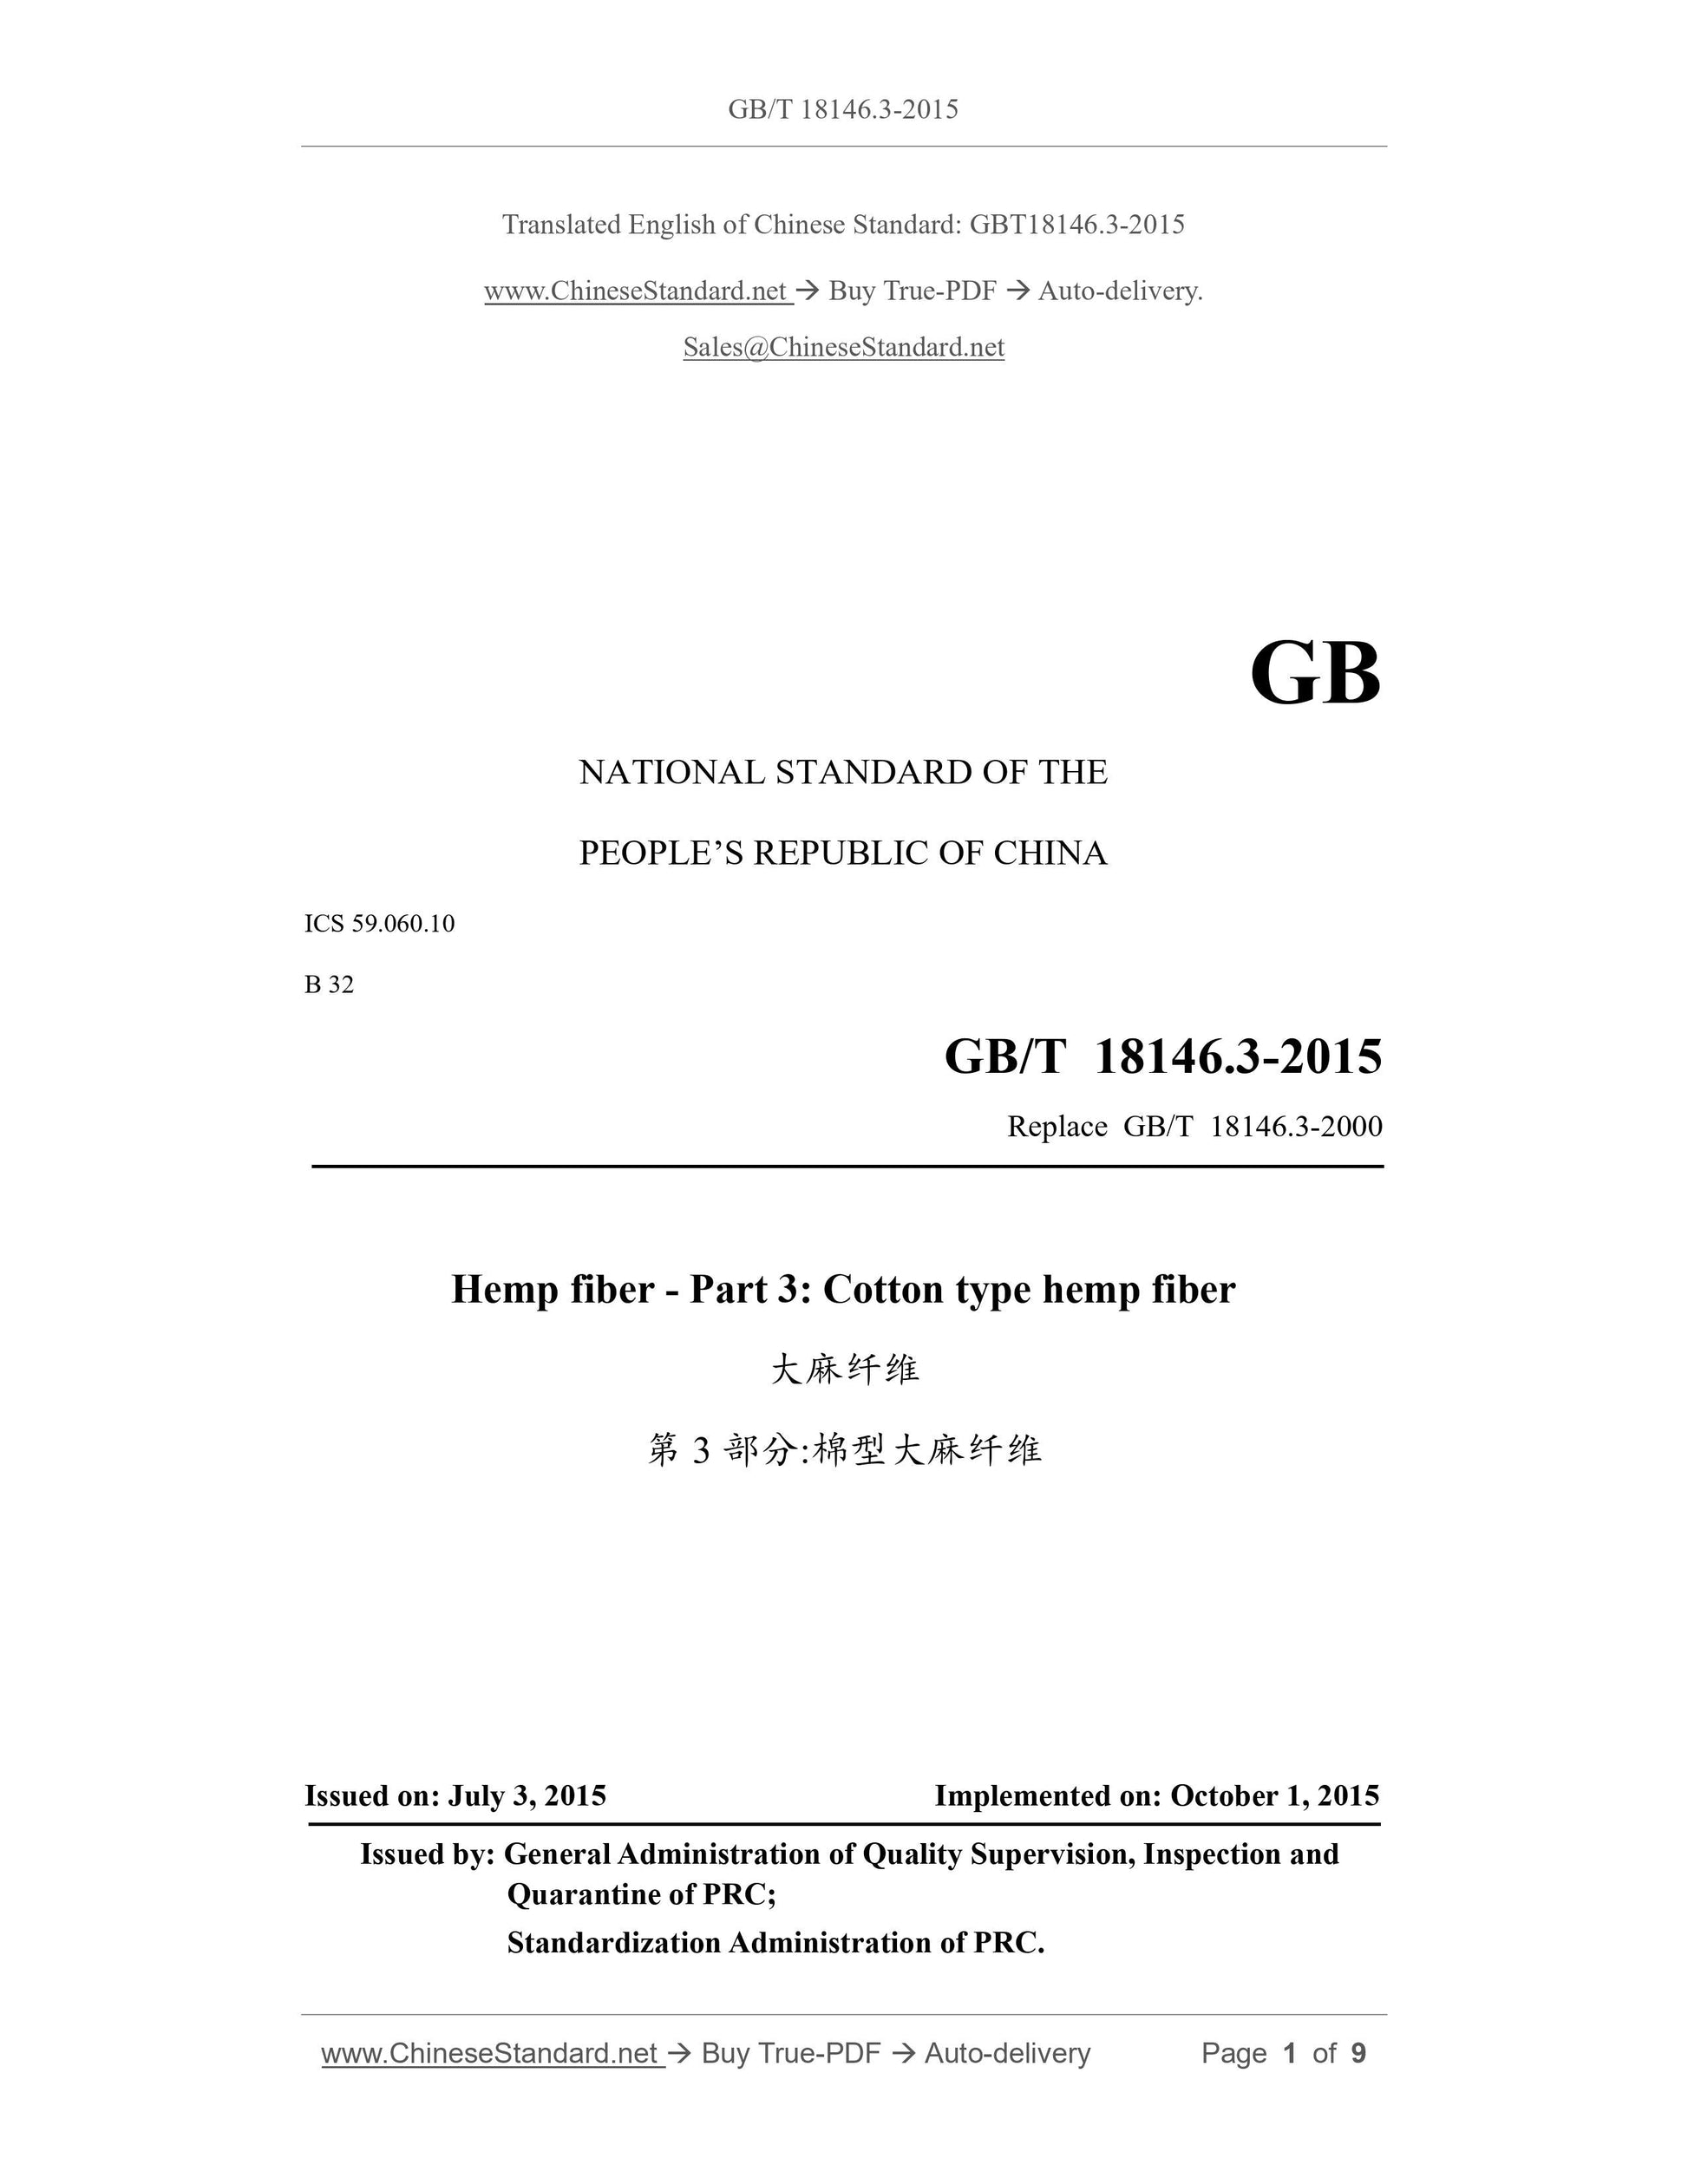 GB/T 18146.3-2015 Page 1